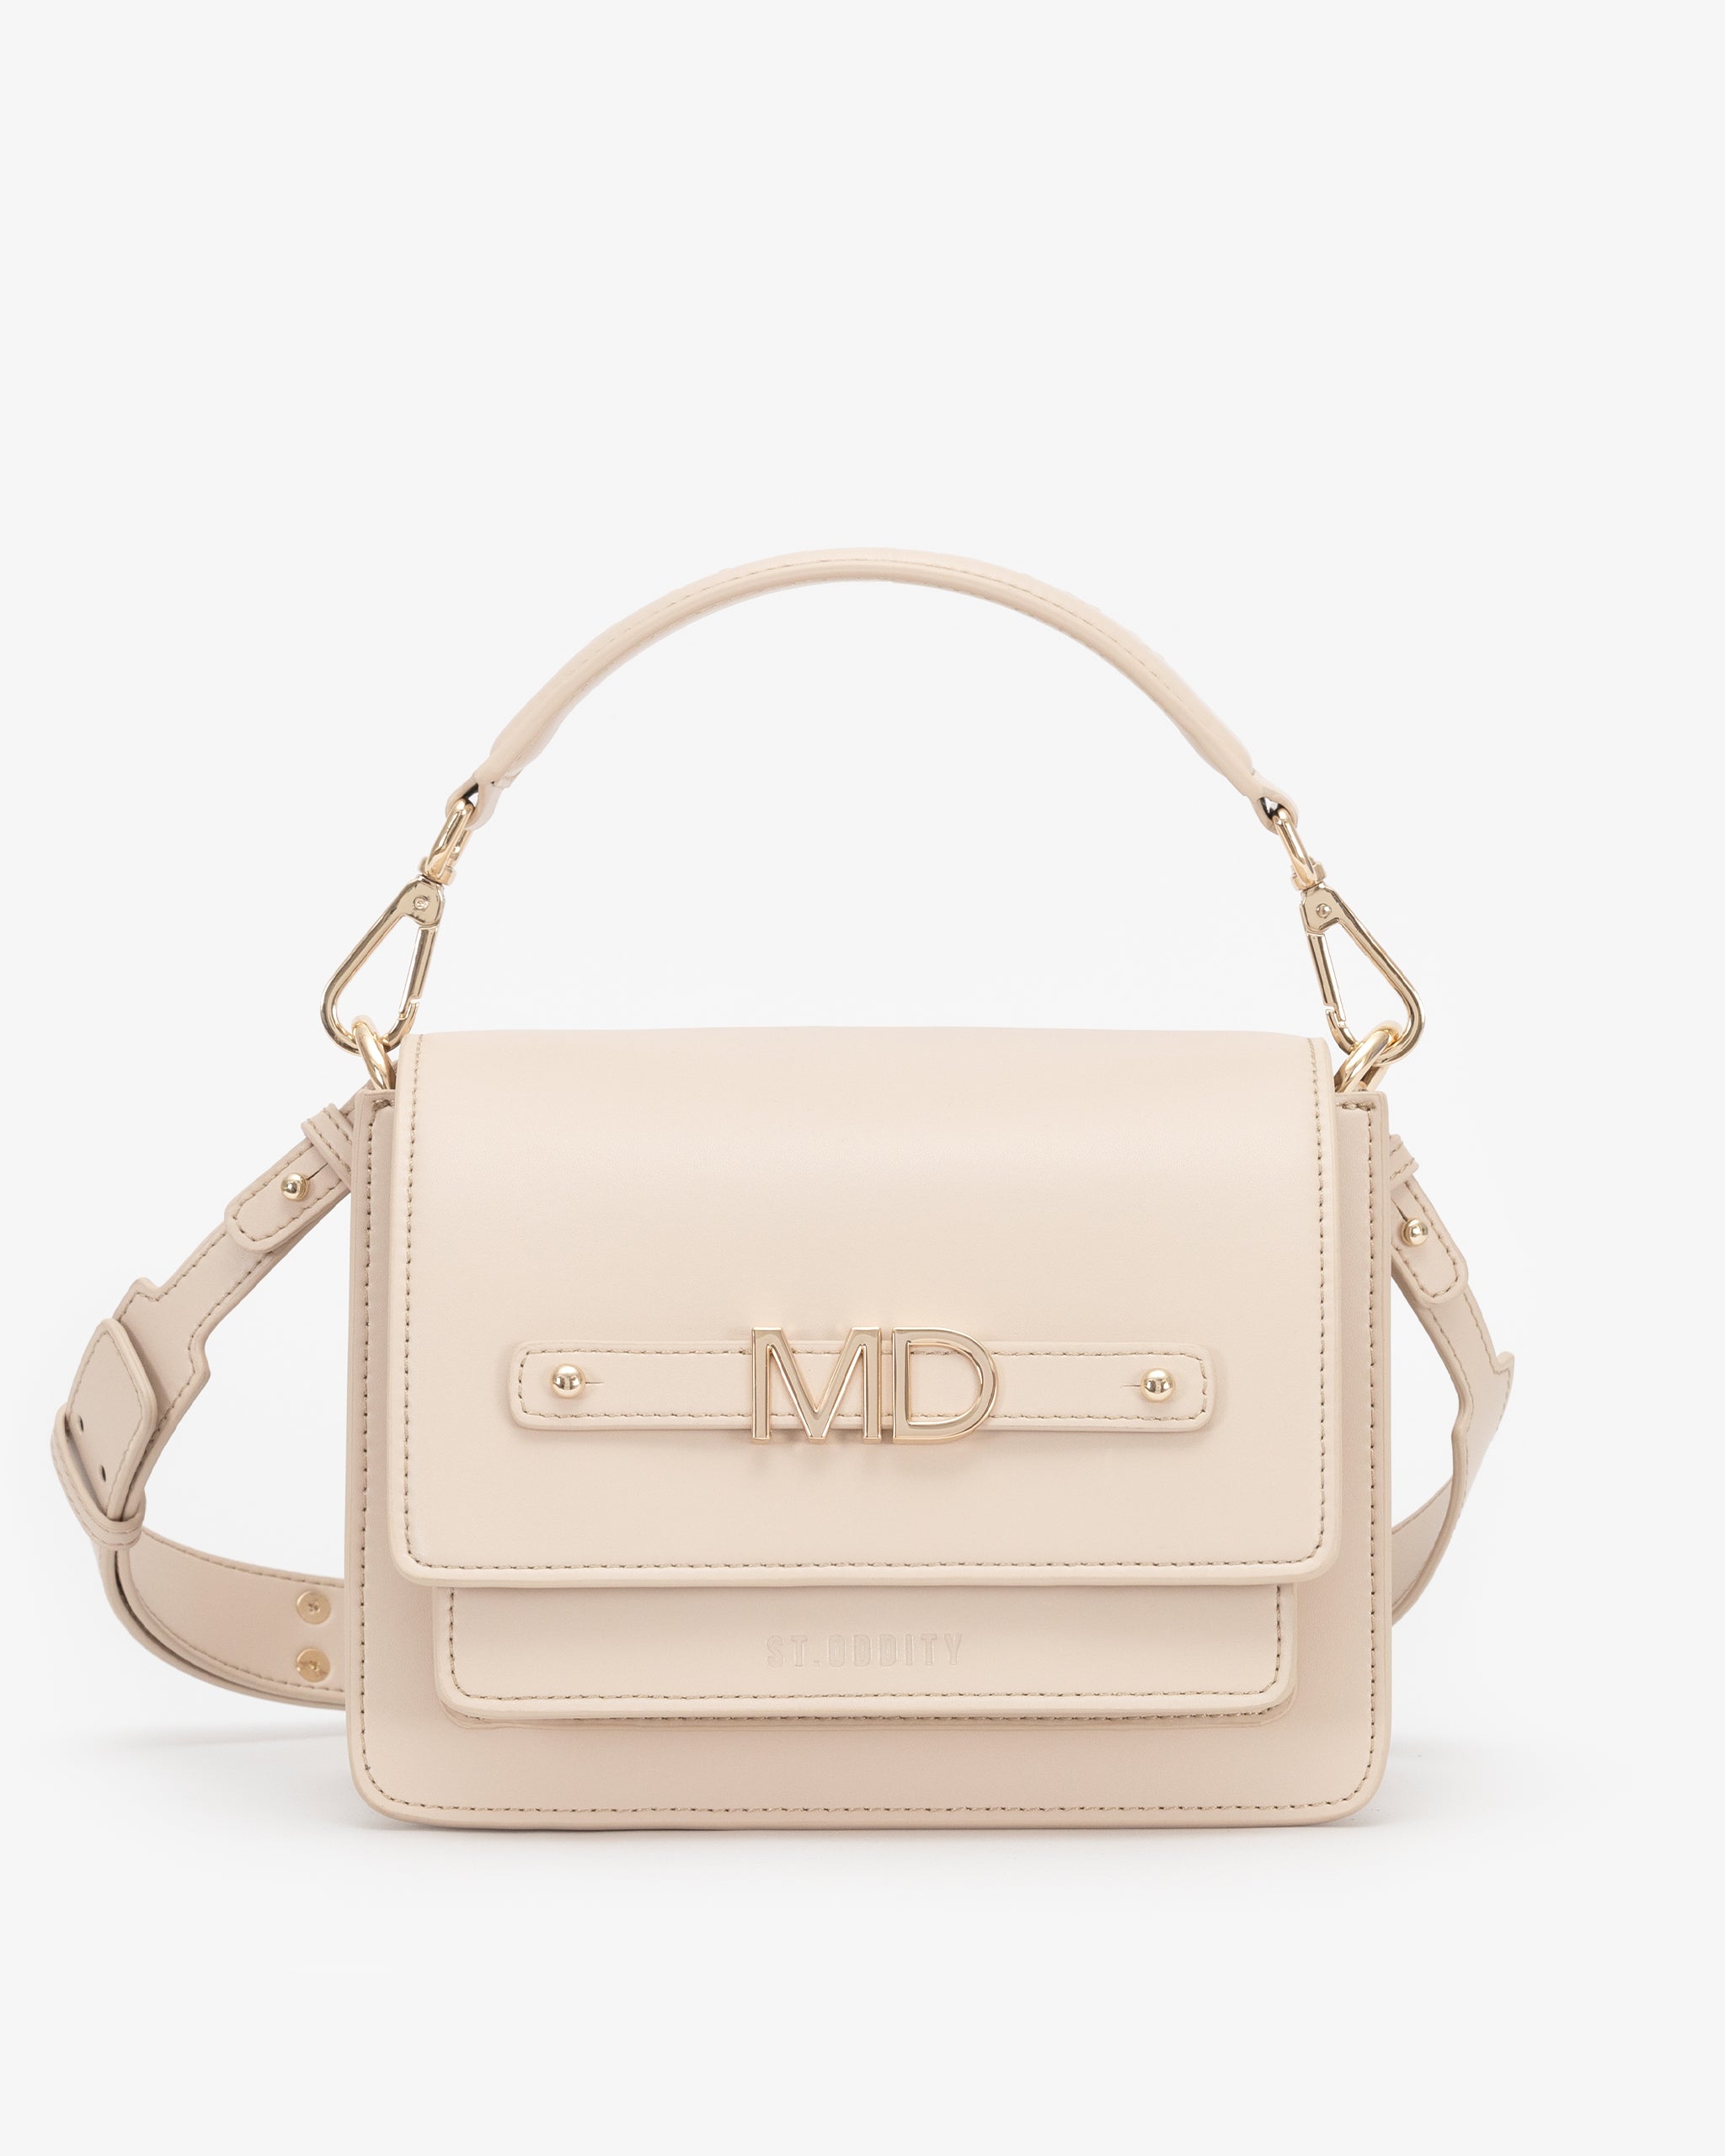 Pre-order (Mid-May): Shoulder Bag in Light Sand with Personalised Hardware